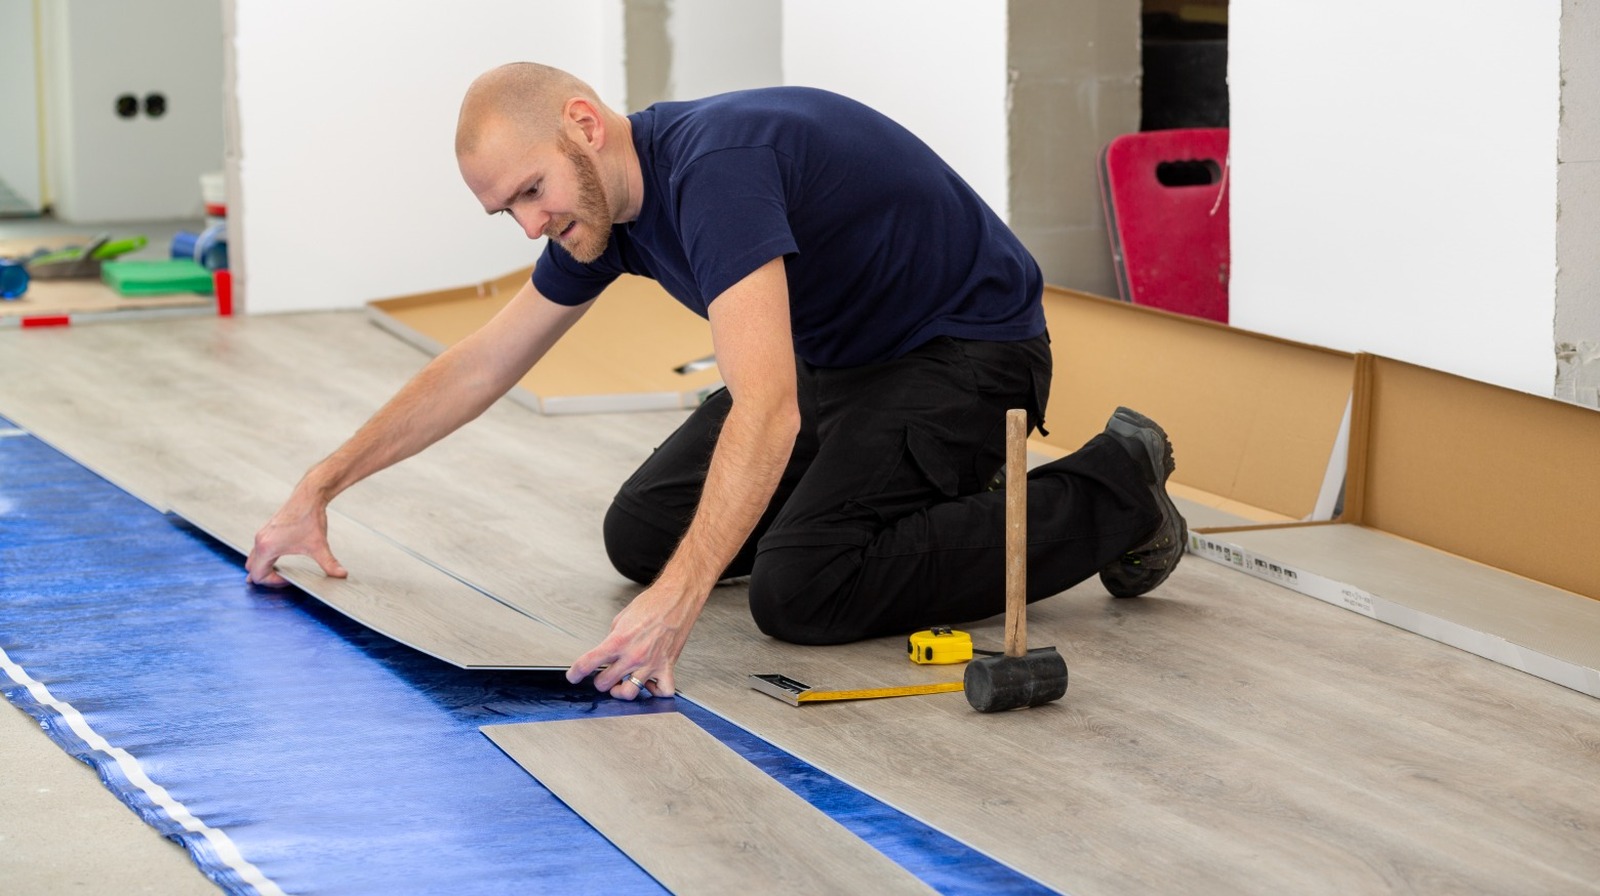 https://www.housedigest.com/img/gallery/what-to-know-before-buying-flooring-underlayment/l-intro-1684151230.jpg